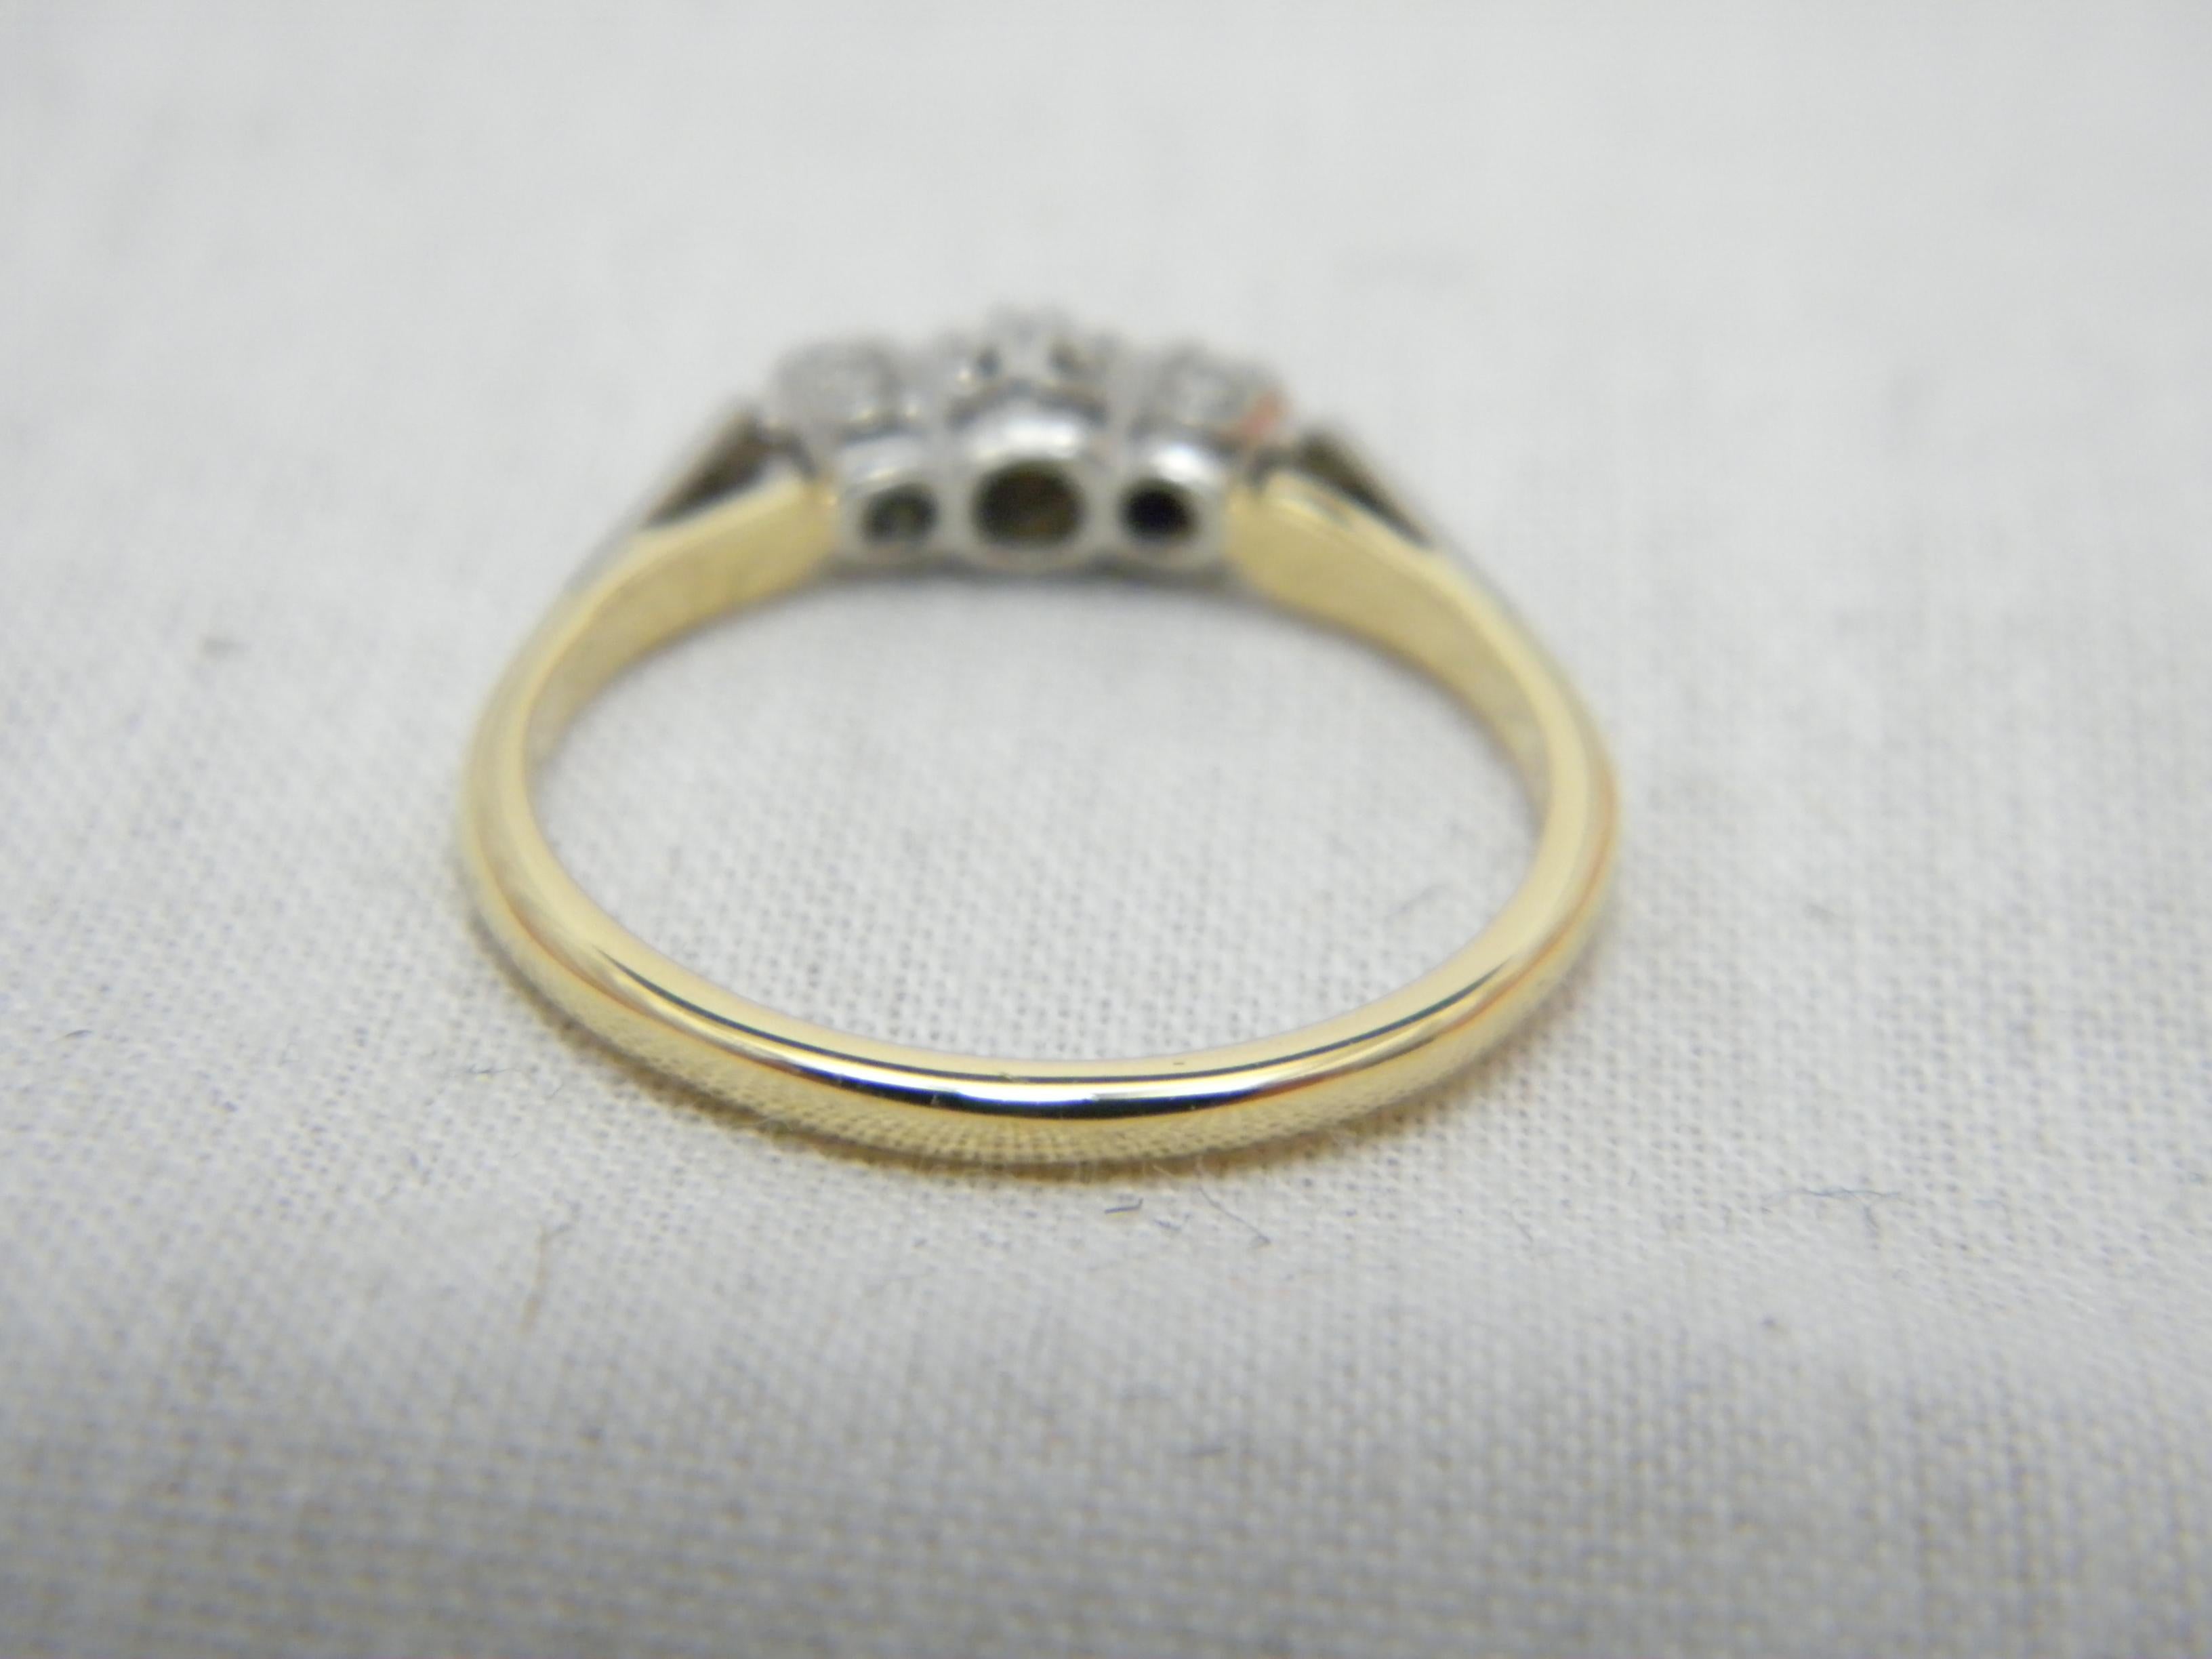 Antique 18ct Gold Platinum Diamond Trilogy Engagement Ring Size L 6 750 950 In Good Condition For Sale In Camelford, GB